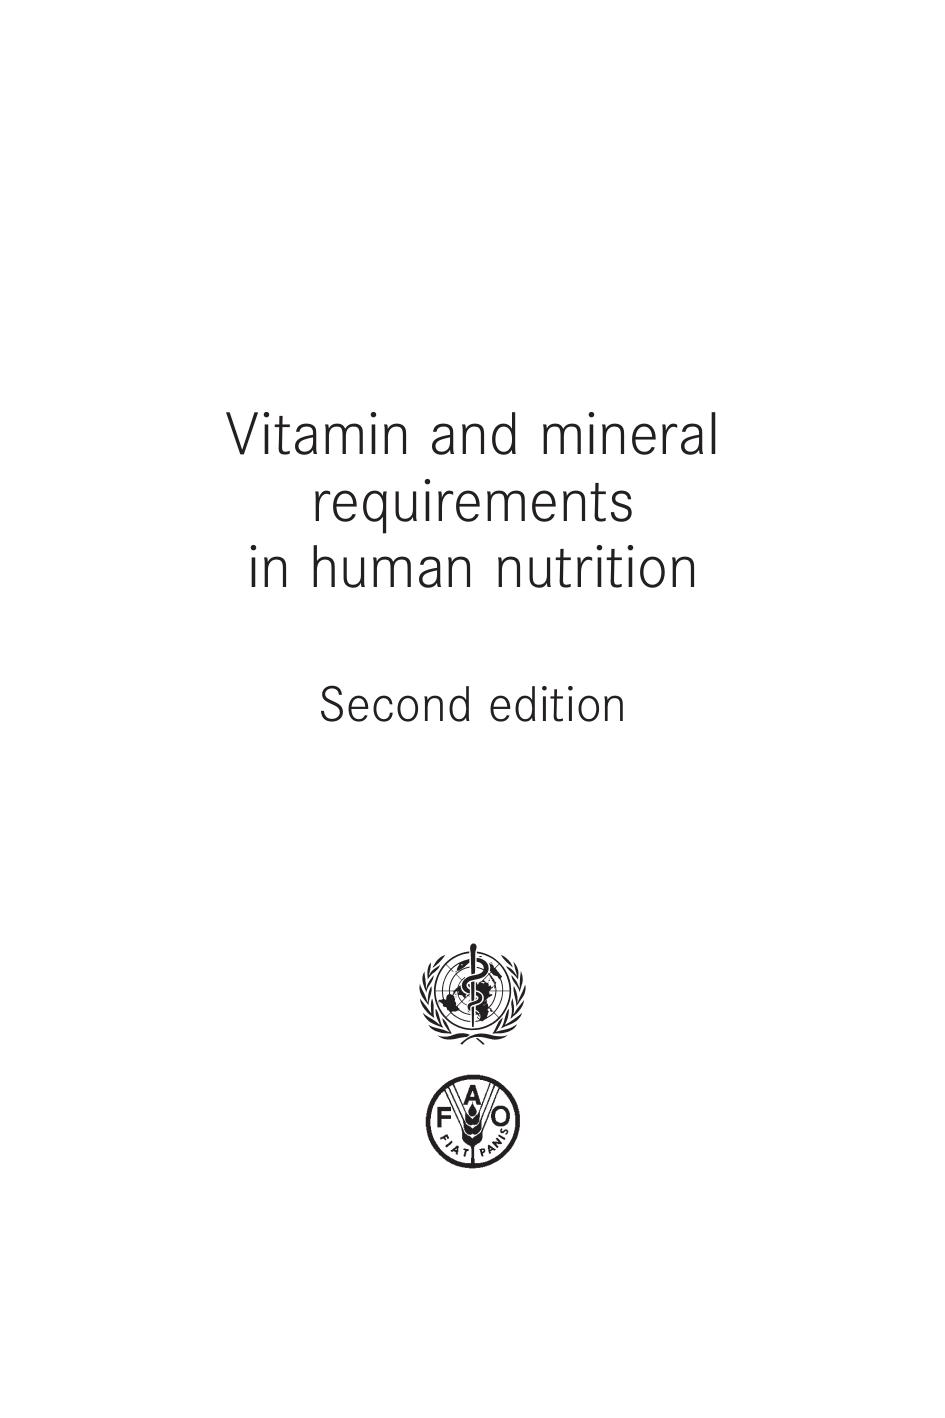 Vitamin and mineral requirements in human nutrition 2004